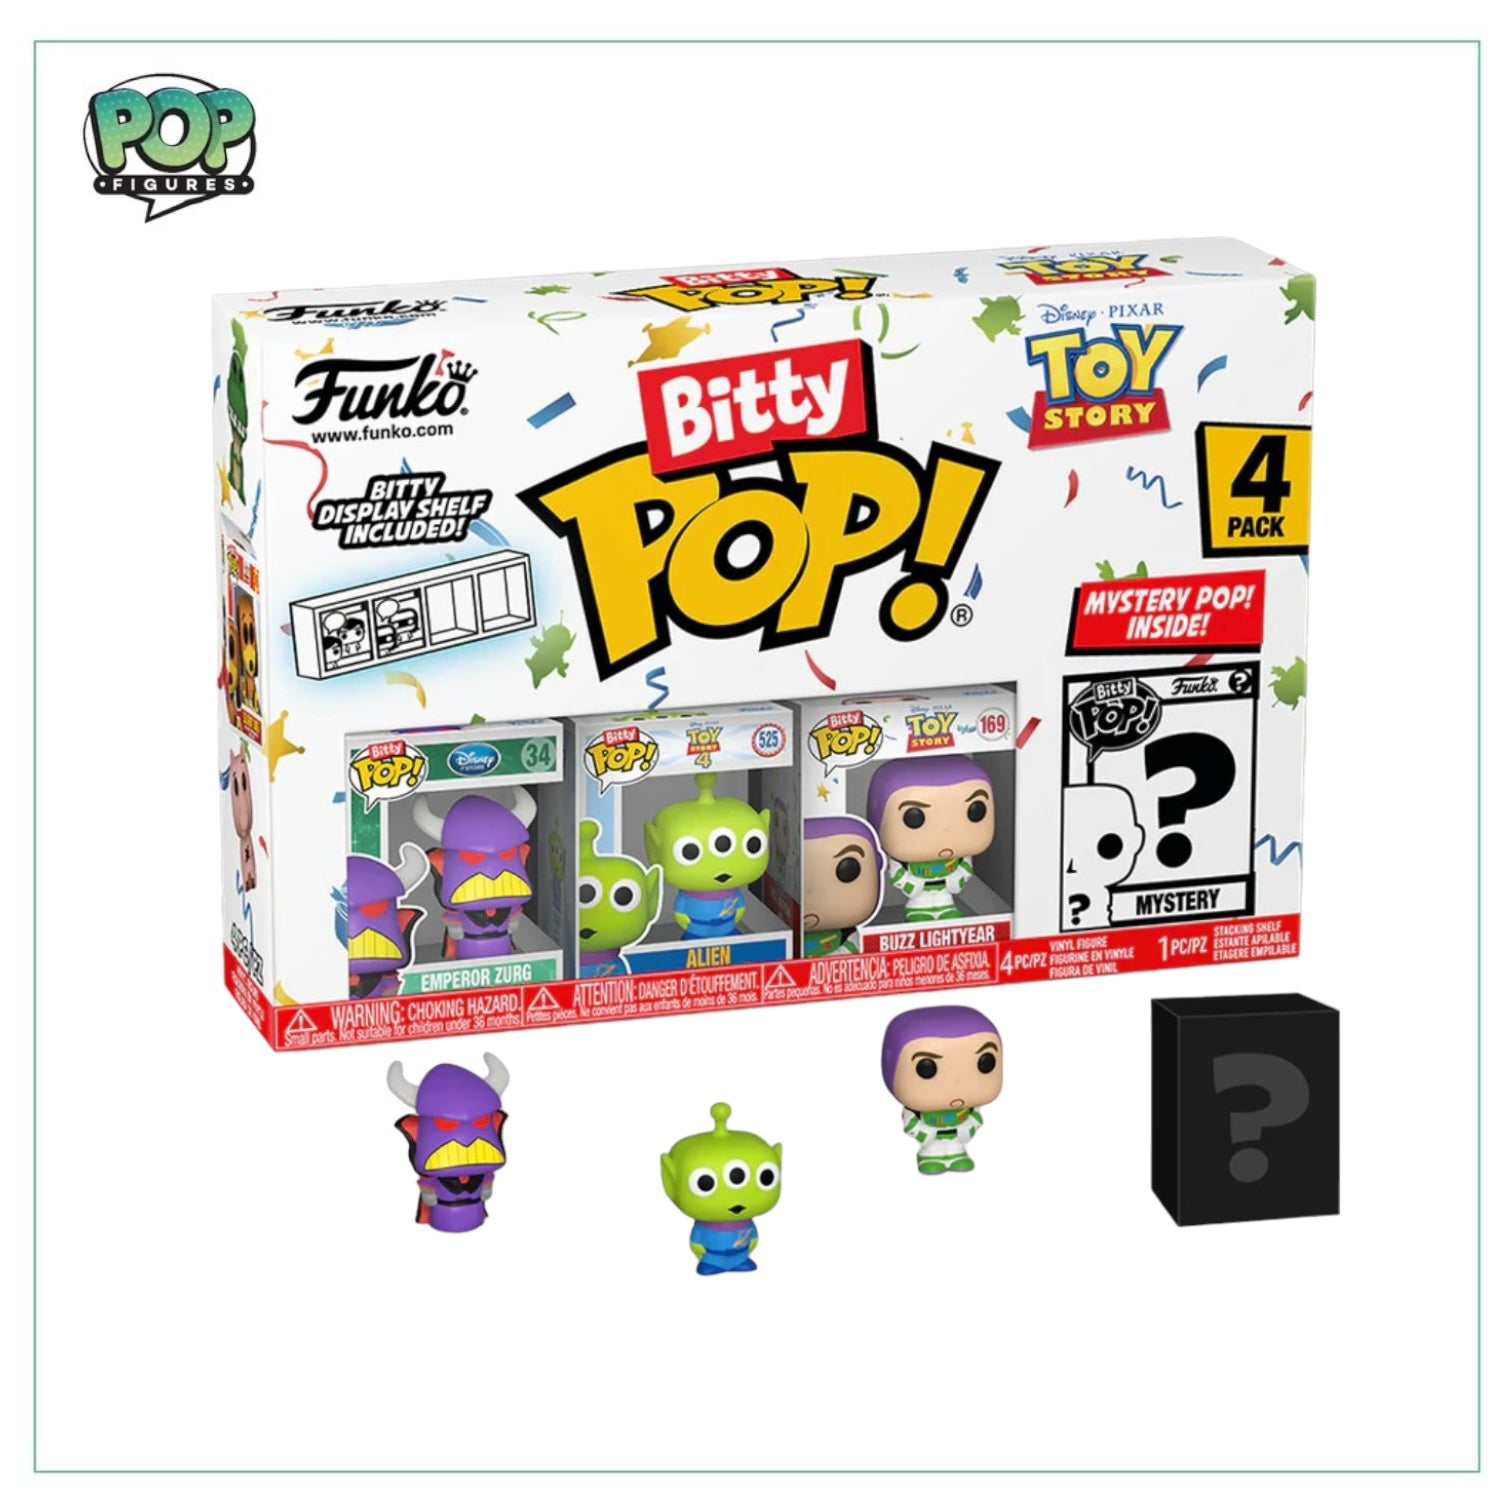 Emperor Zurg 4 pack Bitty POP! - Toy Story - Chance of Chase